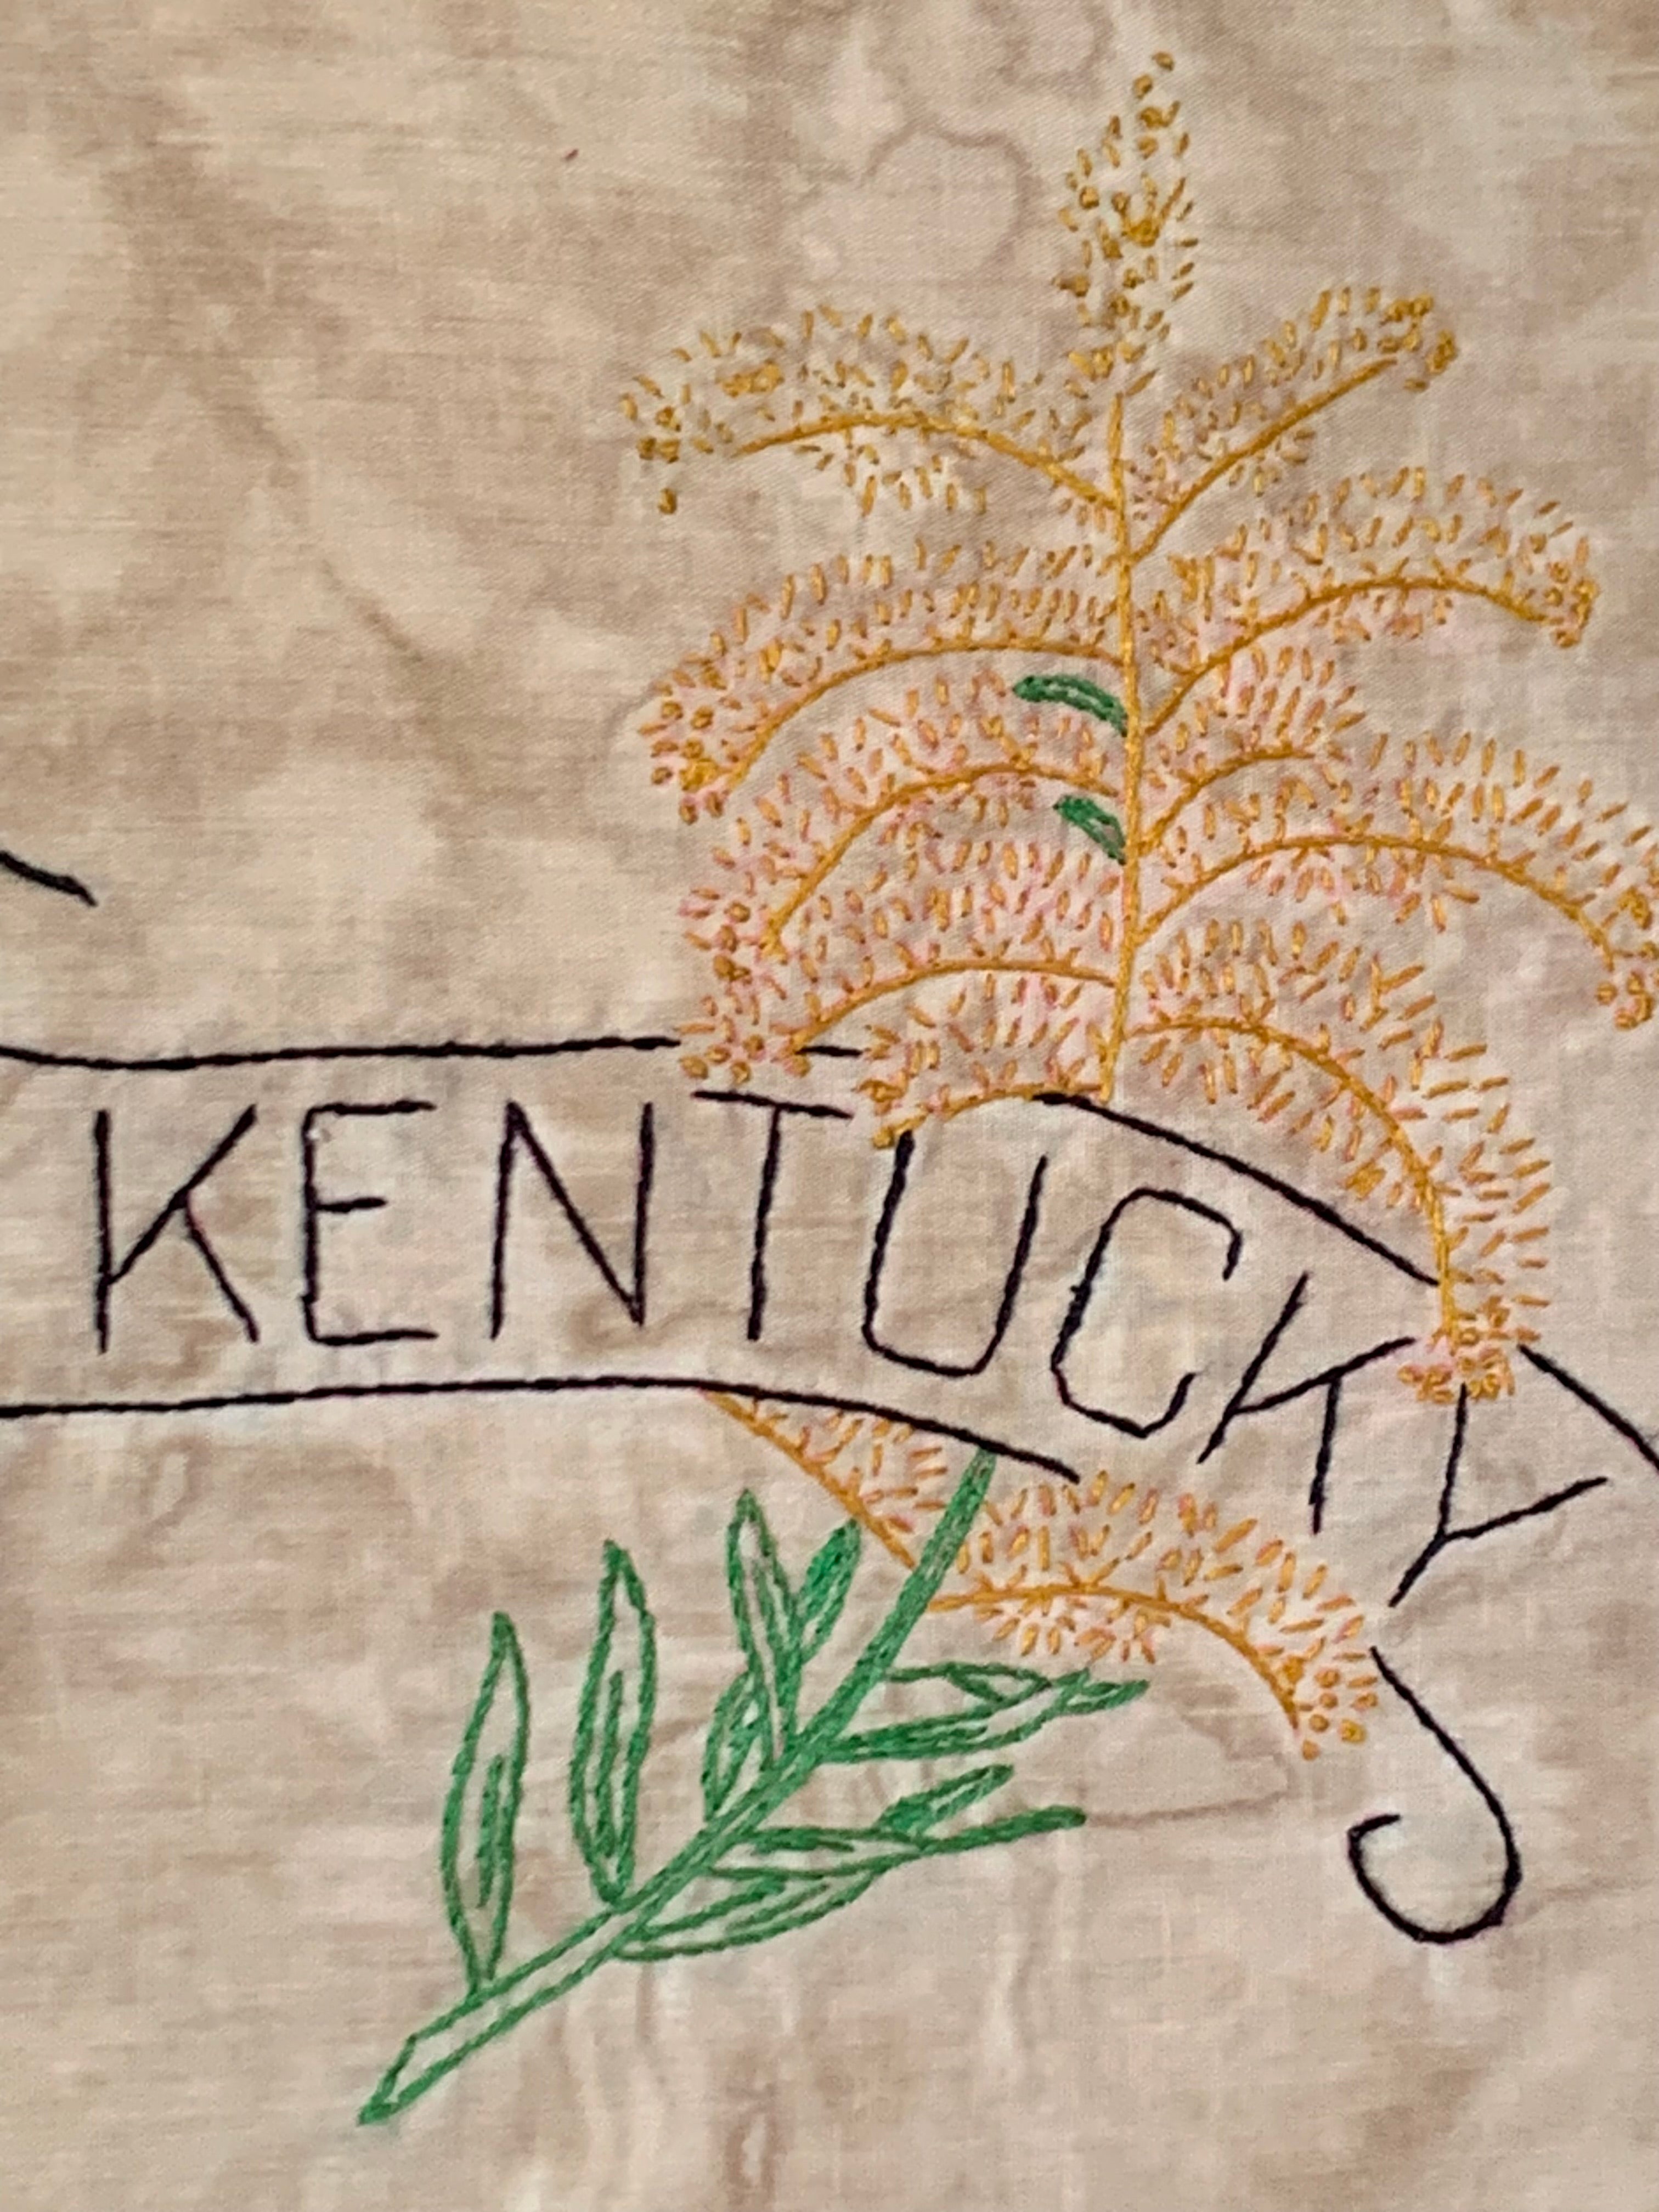 Kentucky State Pillow - Embroidered